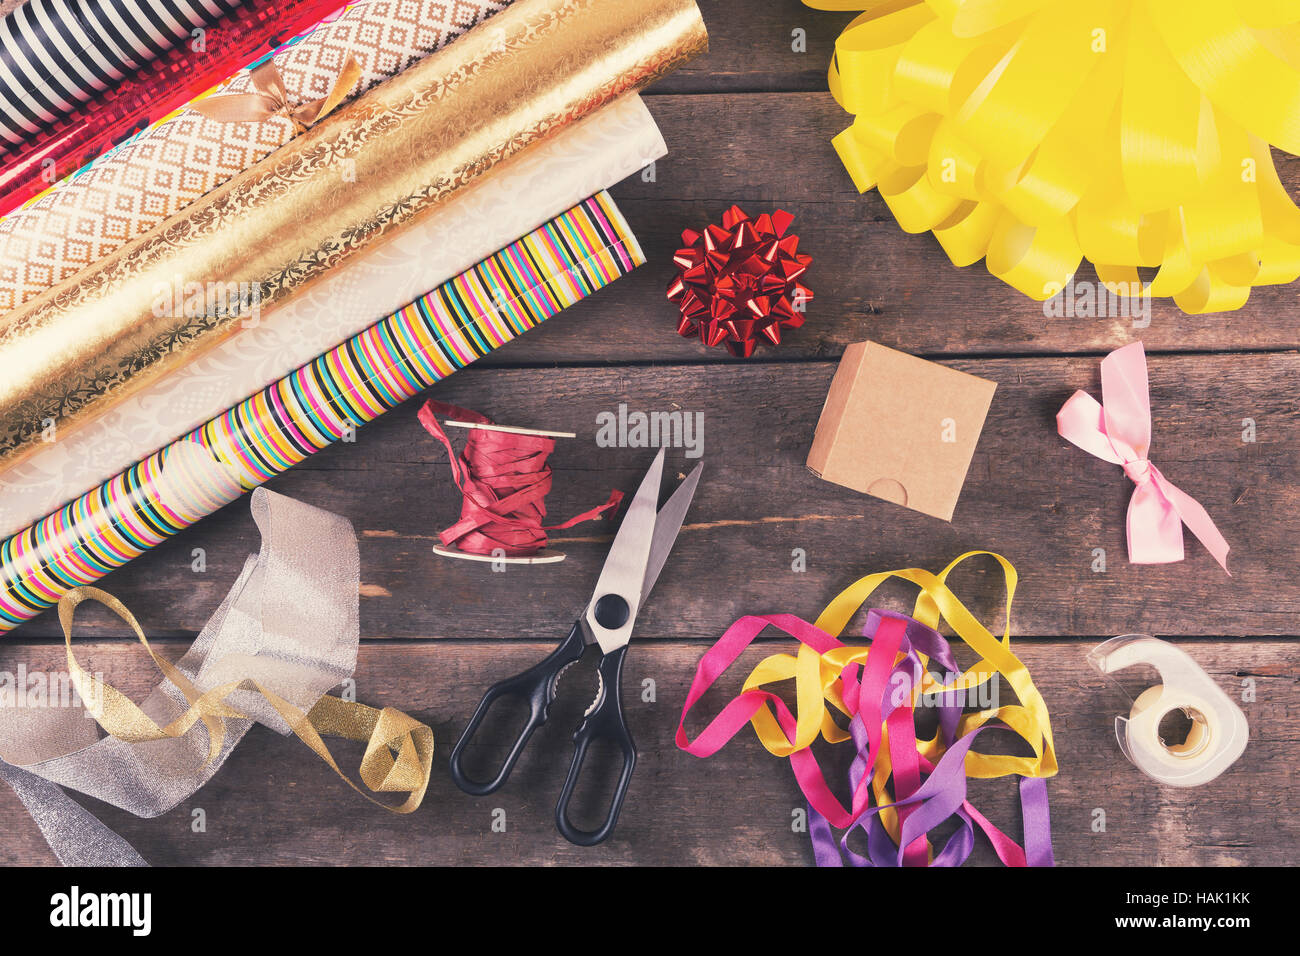 gift wrapping rolls and accessories on the table Stock Photo